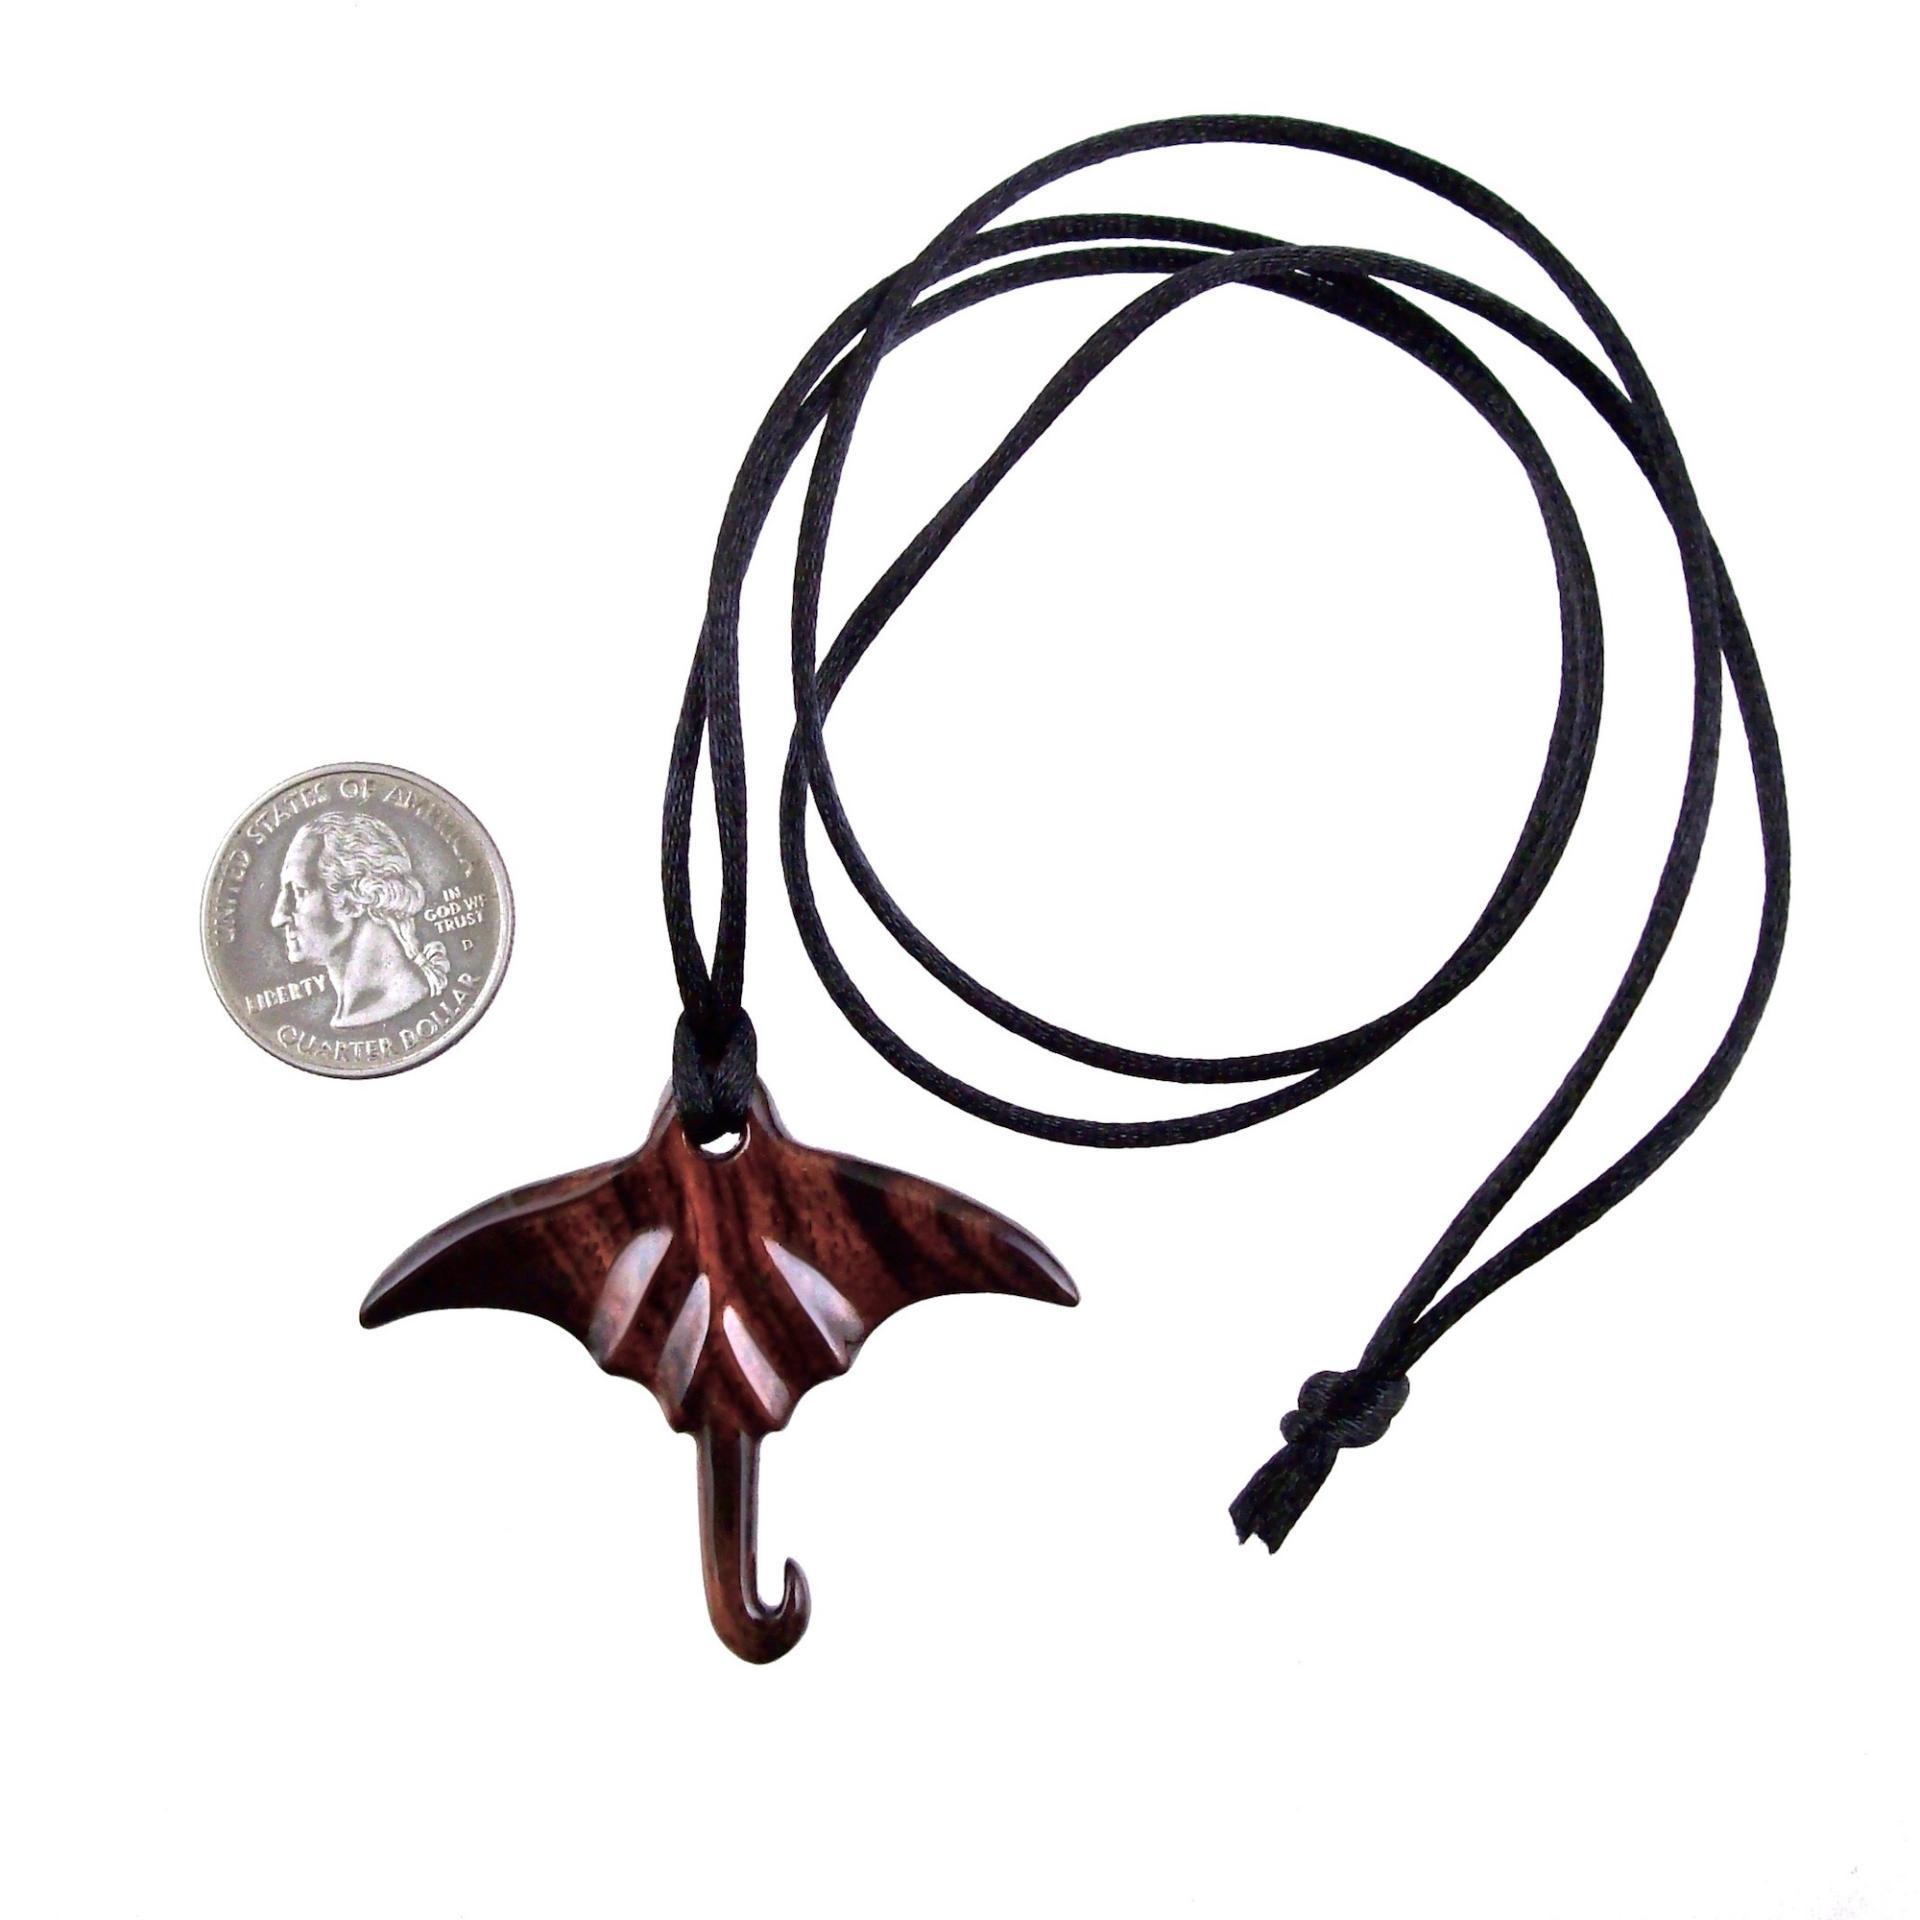 Manta Ray Necklace, Hand Carved Wooden Stingray Pendant, Mens Wood Necklace, Sea Animal Nautical Jewelry Gift for Him